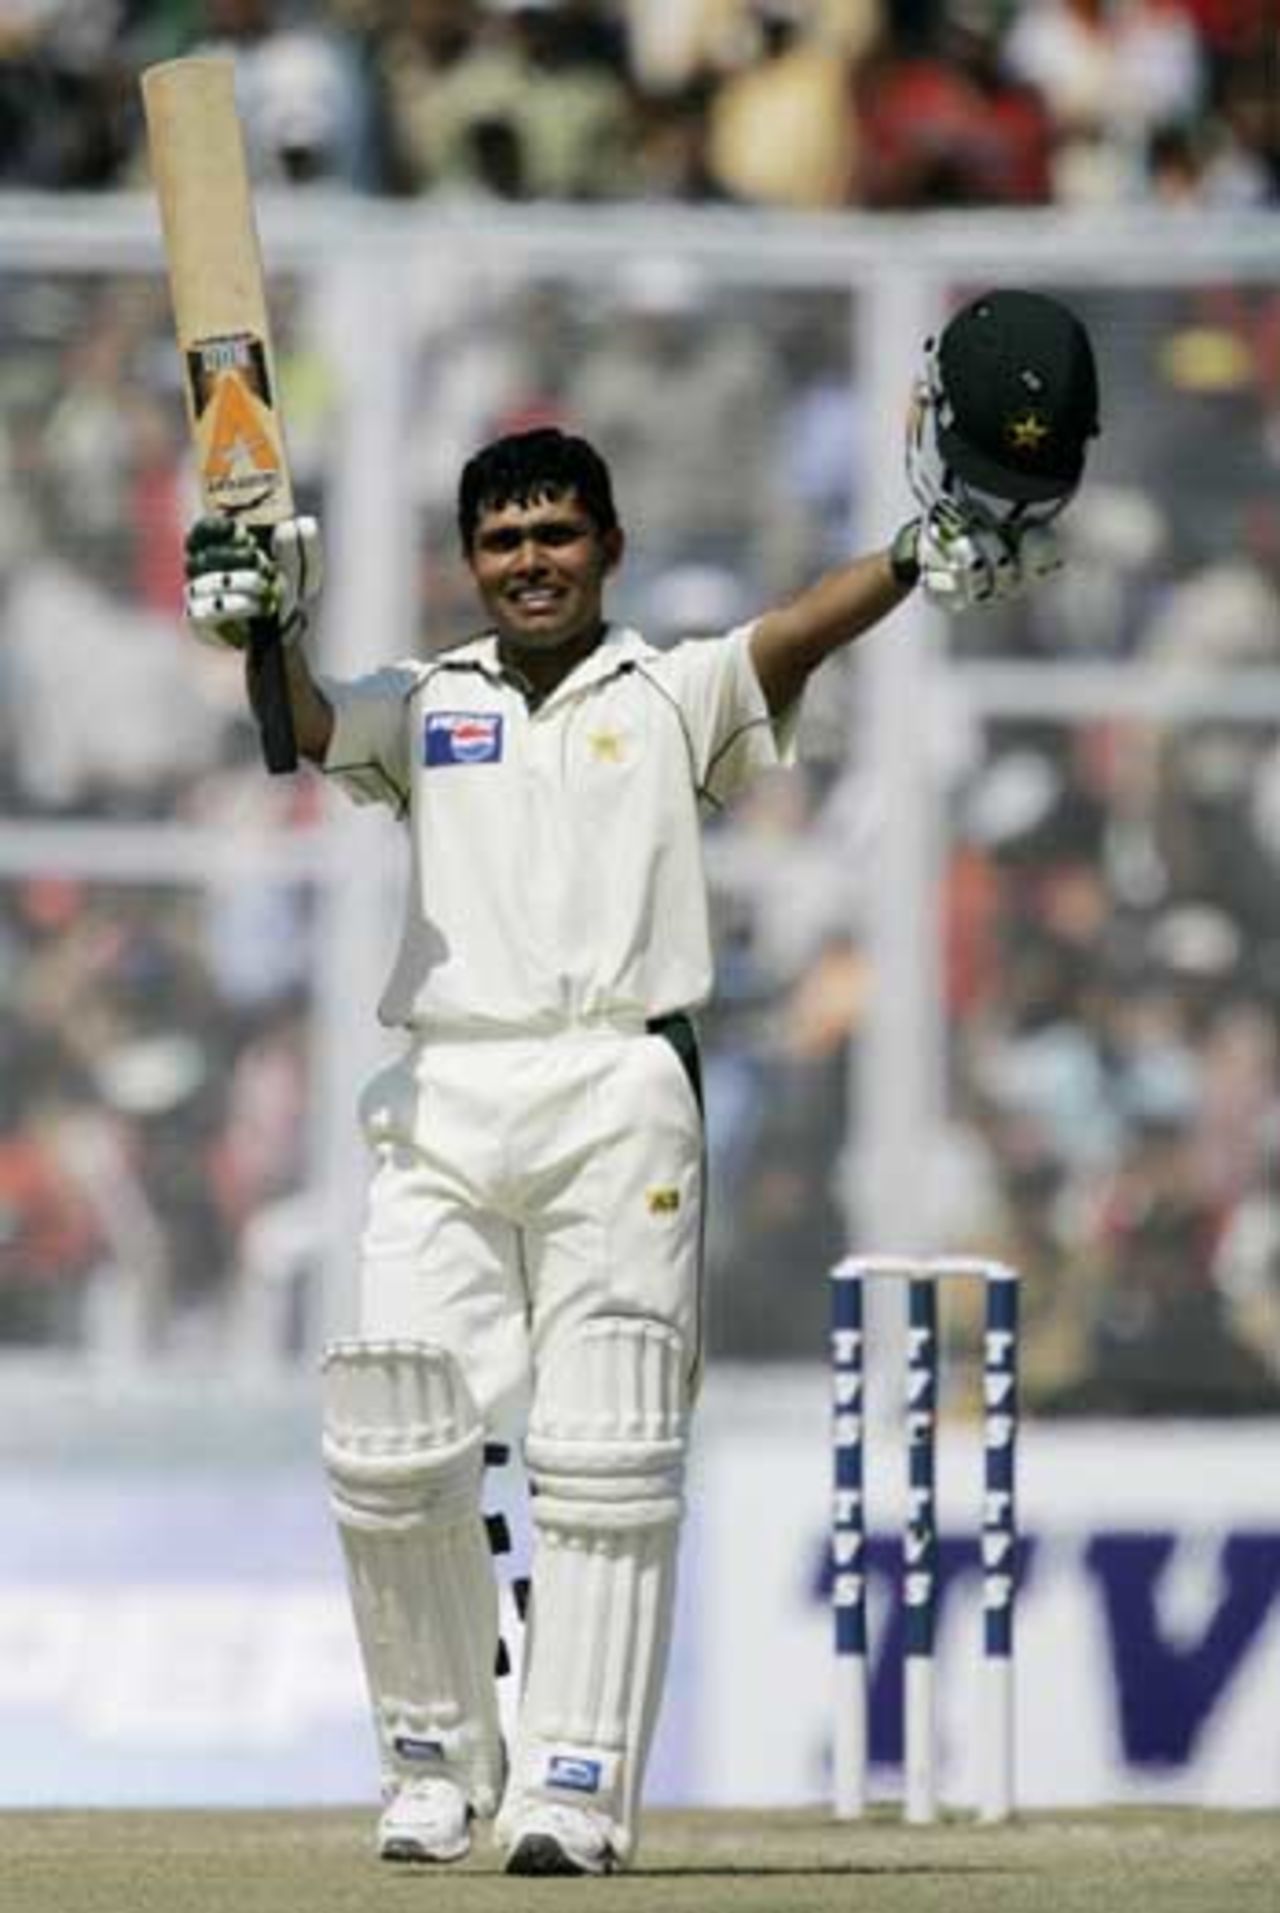 Kamran Akmal's maiden Test hundred could not have come at a better time. And he got a rousing ovation when he reached three figures, India v Pakistan, 1st Test, Mohali, 5th day, March 12, 2005